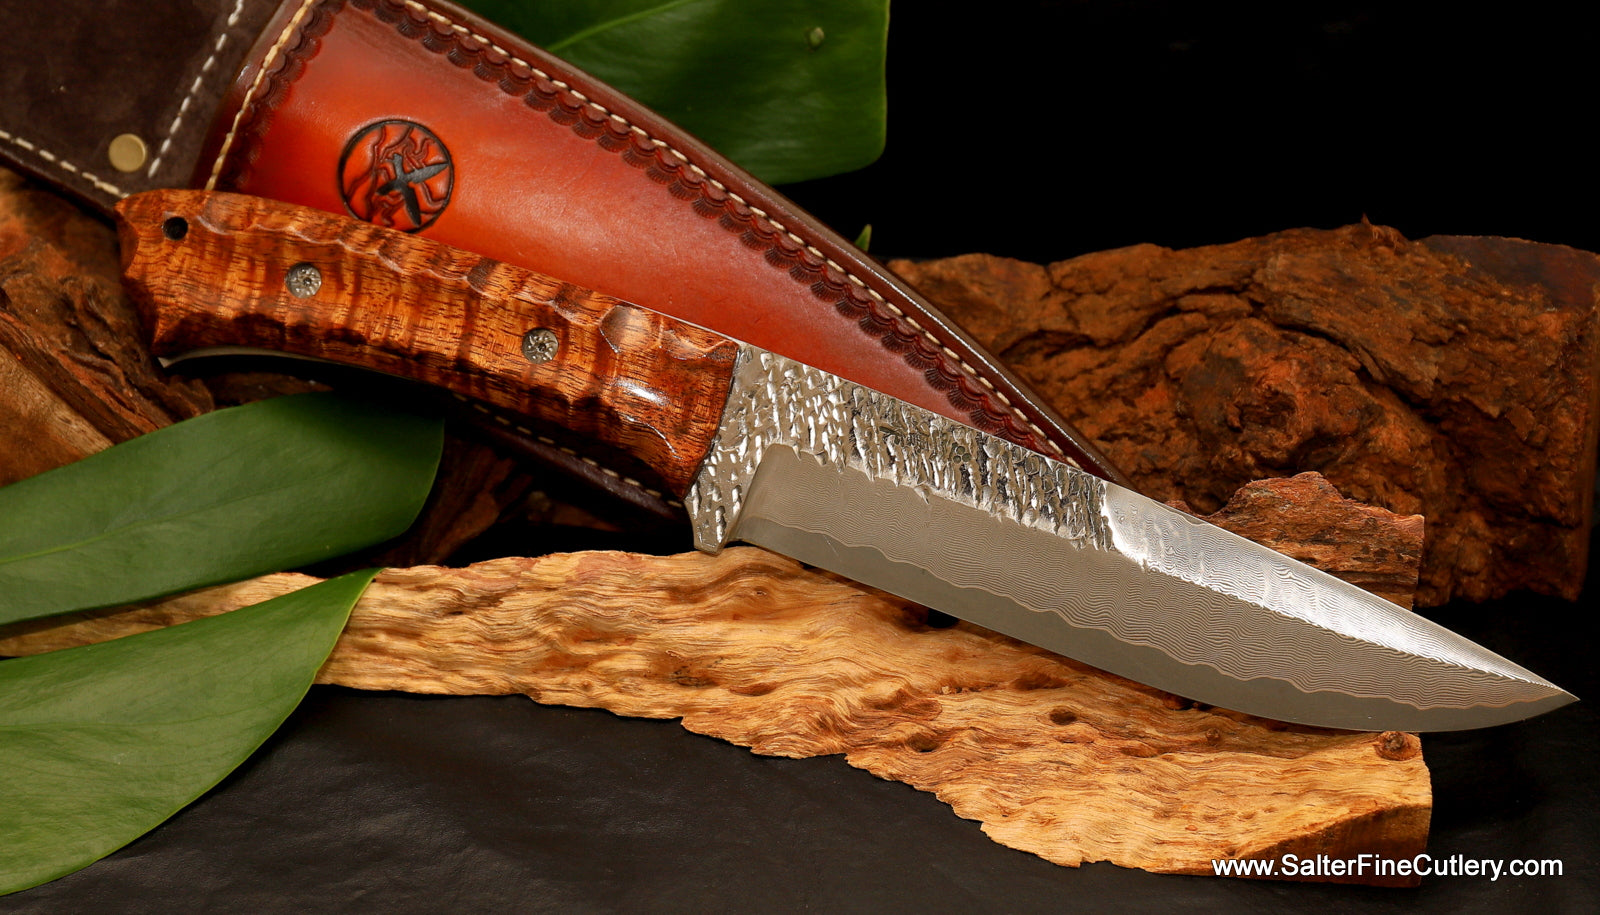 Custom handmade combination Raptor-River design pattern collectible knife exclusively from Salter Fine Cutlery